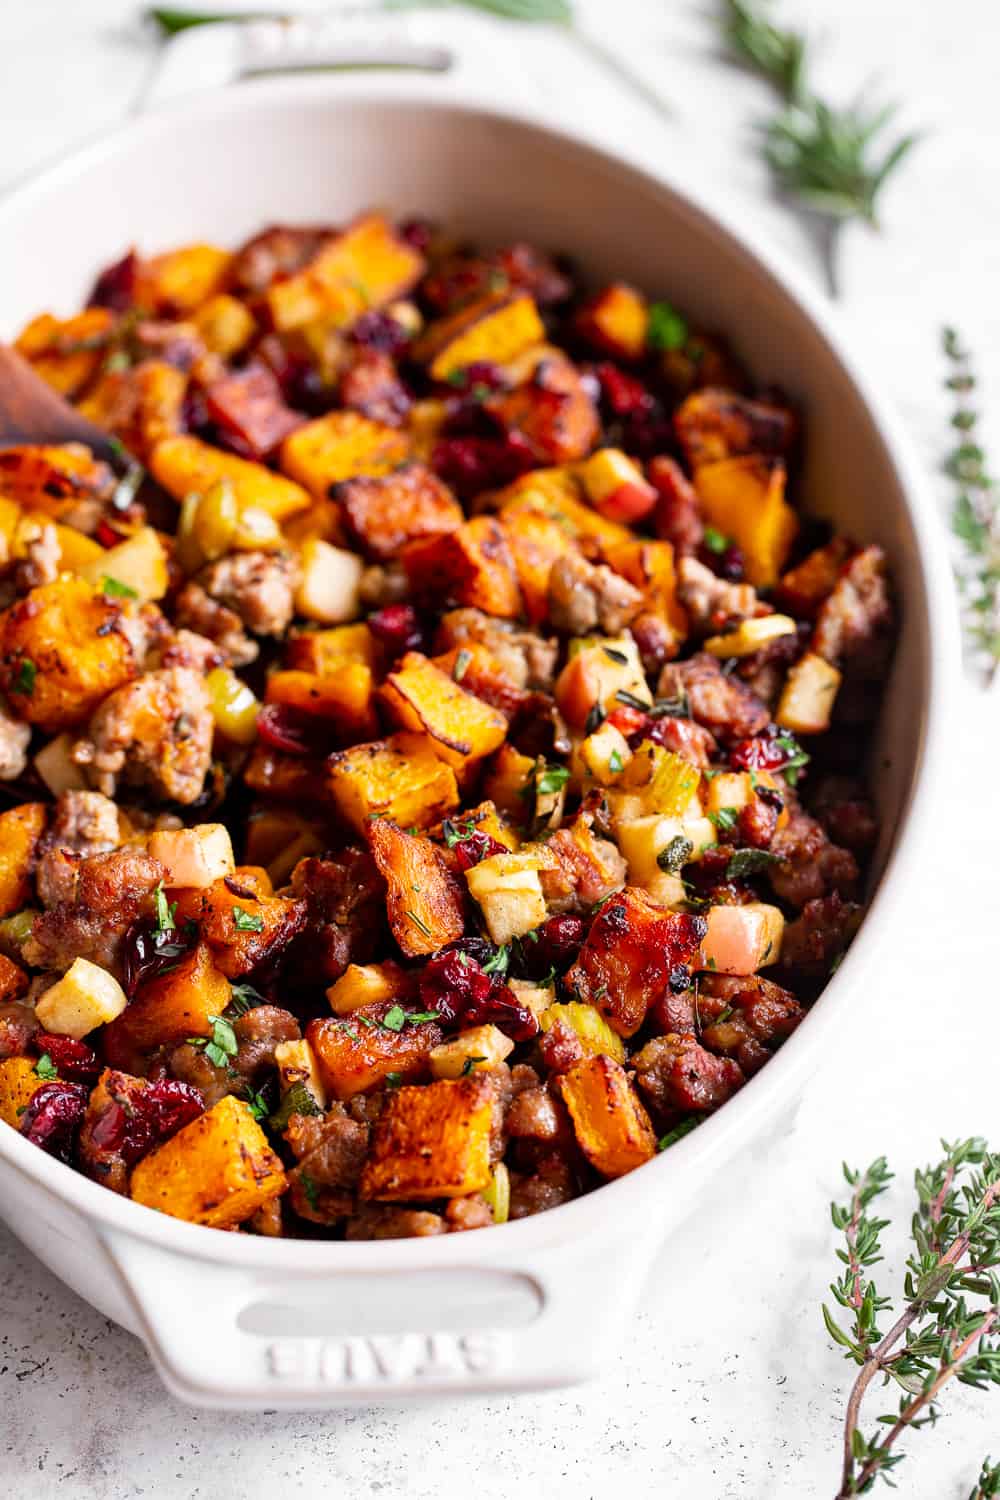 This delicious Butternut Sausage Paleo Stuffing with apples and cranberries has all the flavor of traditional Thanksgiving stuffing or dressing but is grain free, gluten free, dairy free and Whole30 friendly too! Toasty, sweet roasted butternut squash and savory sausage form the base for this Paleo style holiday favorite. #paleo #thanksgiving #sidedish #butternutsquash #cleaneating #grainfree #whole30